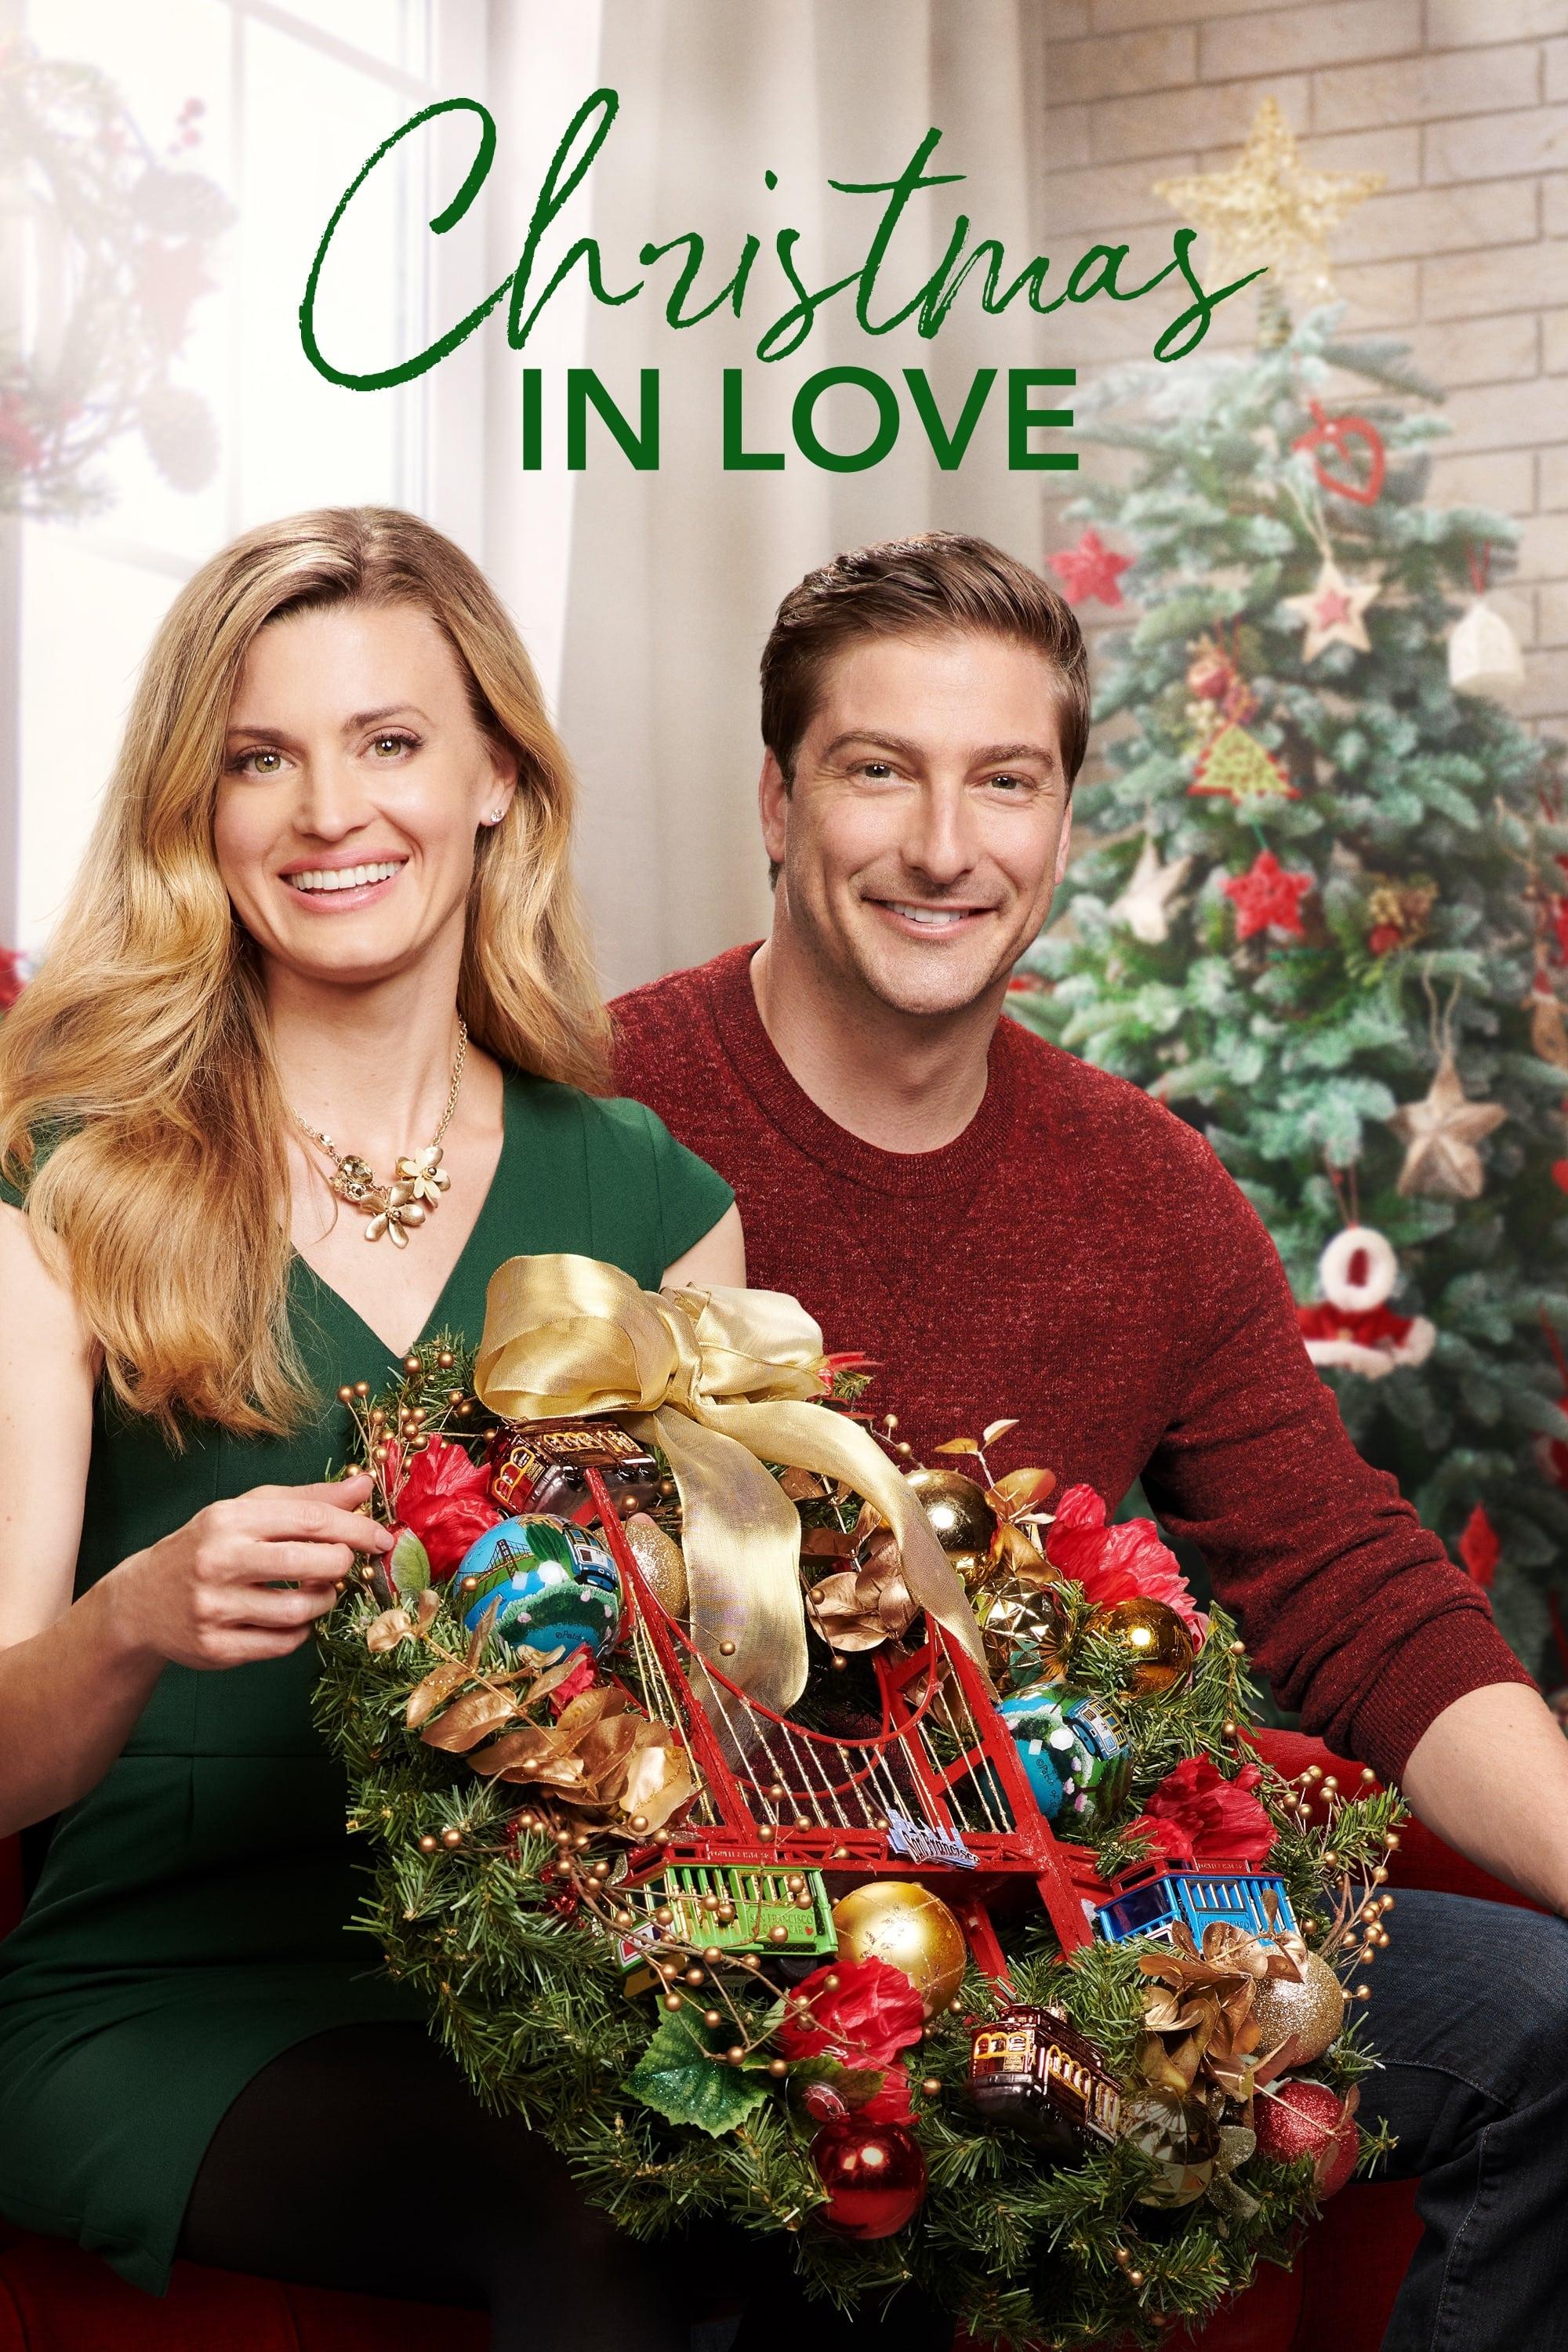 Christmas in Love poster